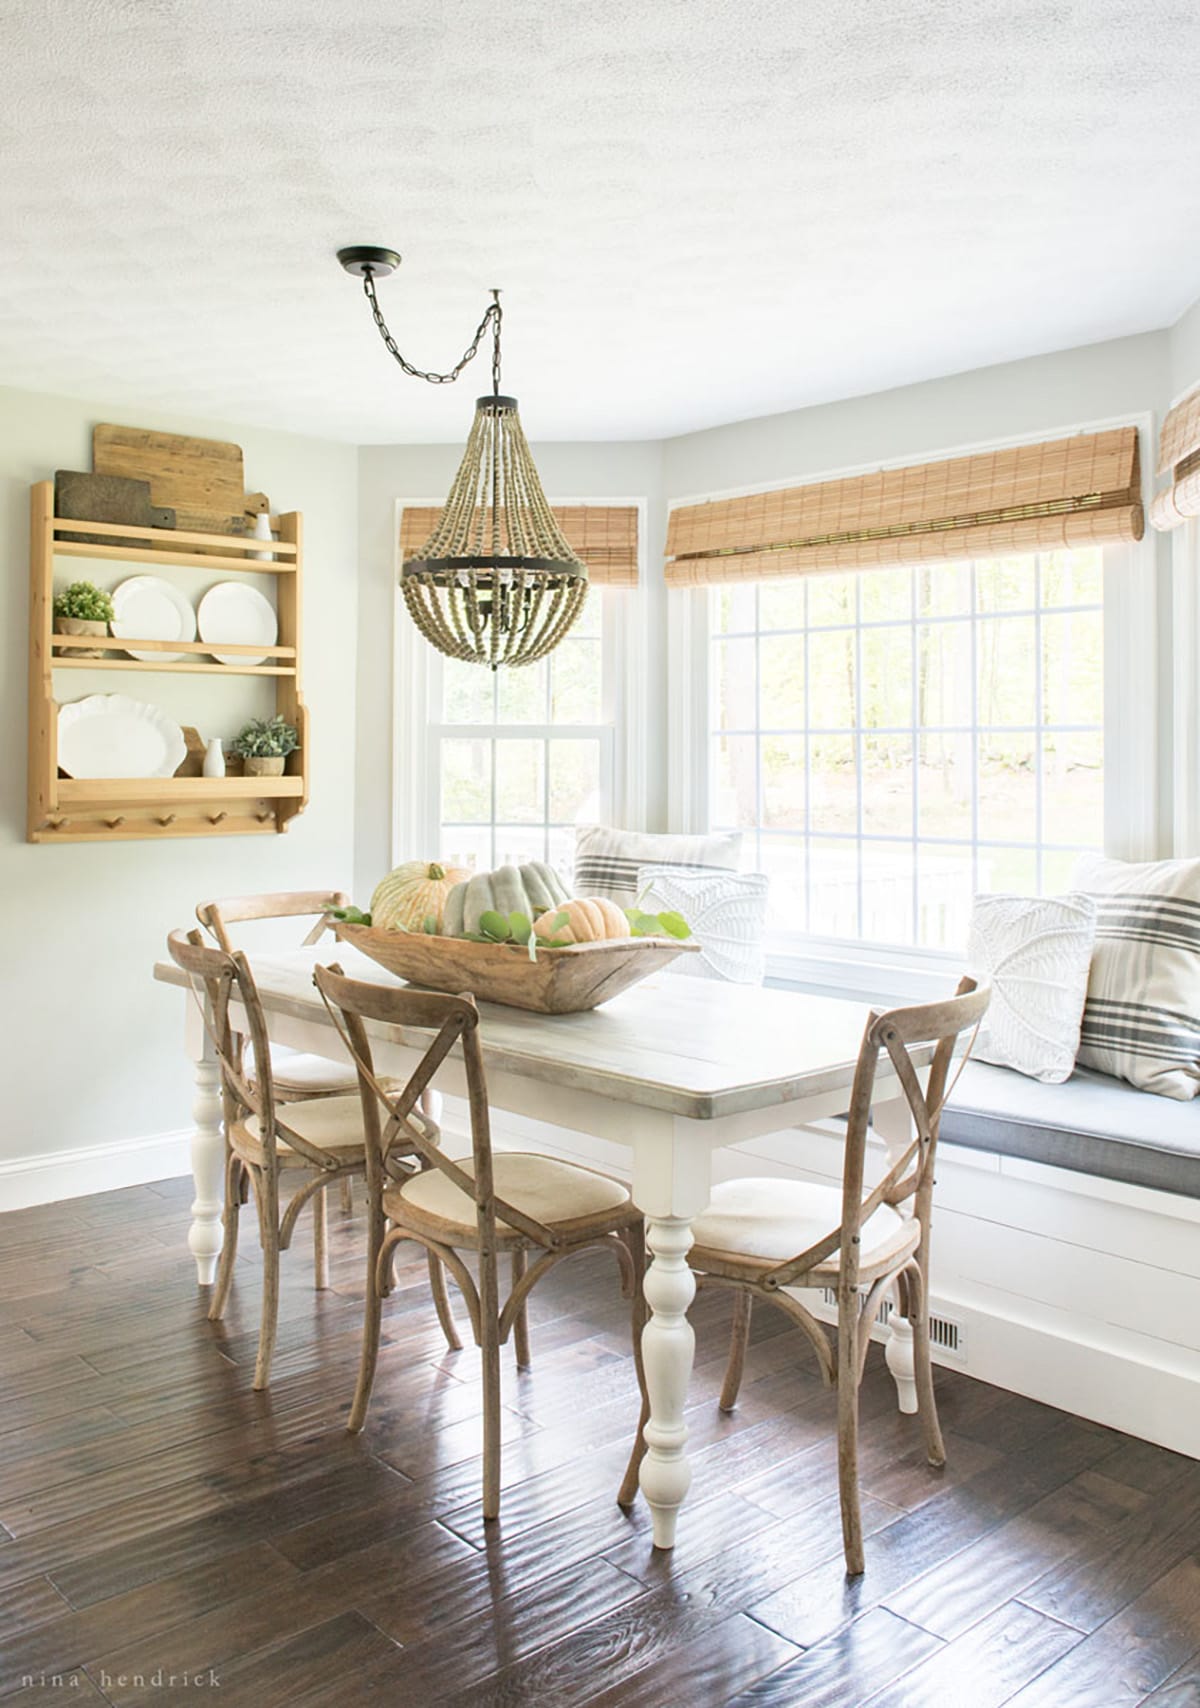 A cozy dining room with a wooden table and chairs, perfect for a fall home tour.